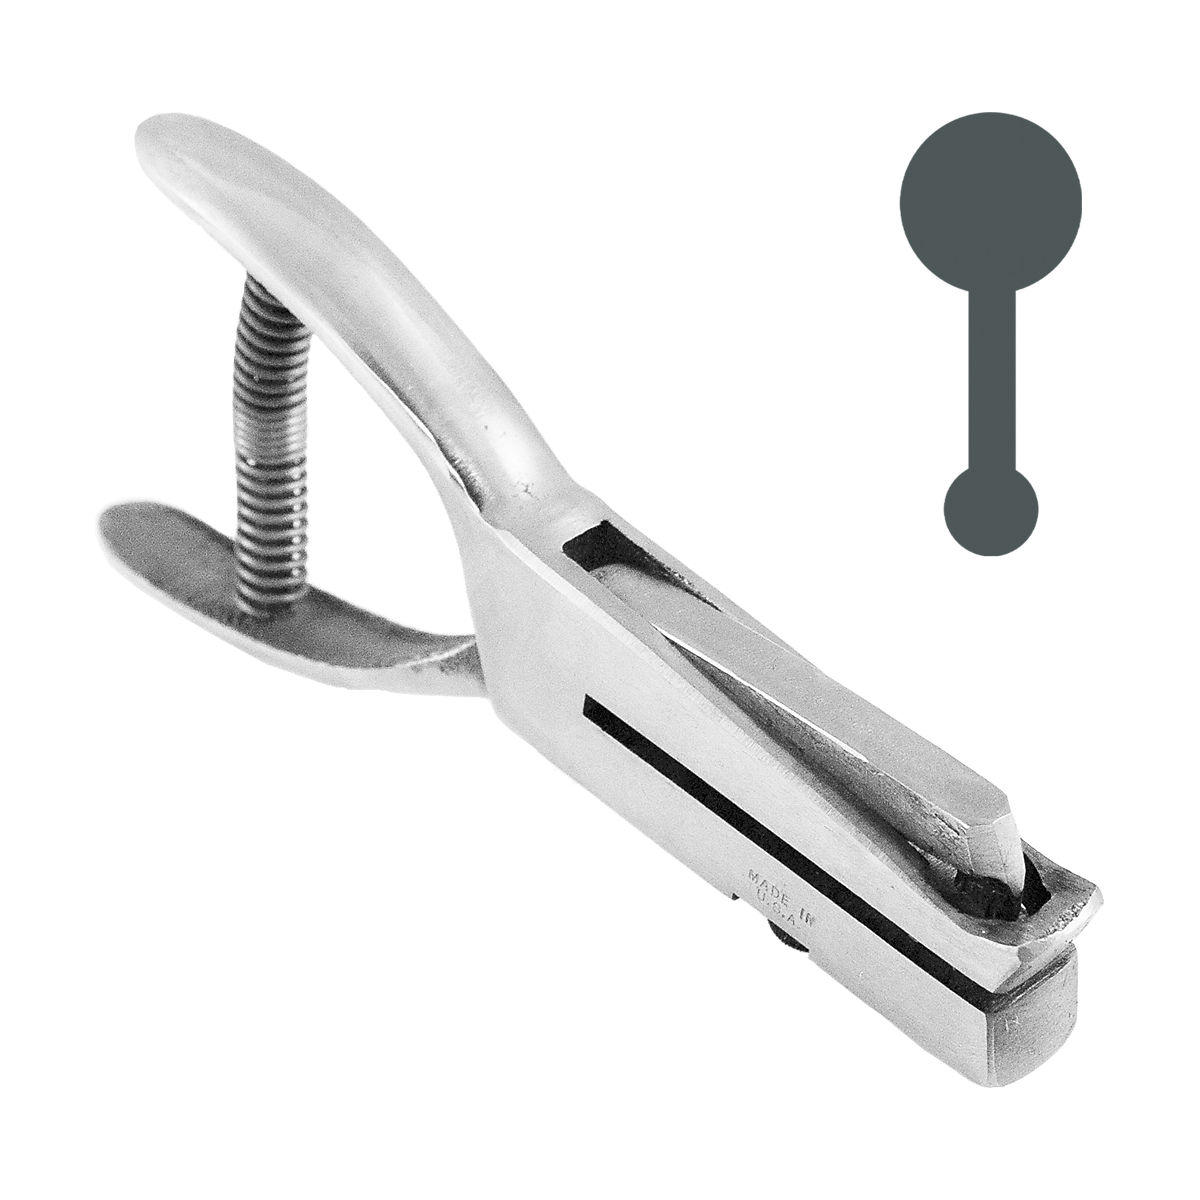 Vertical Key Hole Punch - Vertical Blind Tools